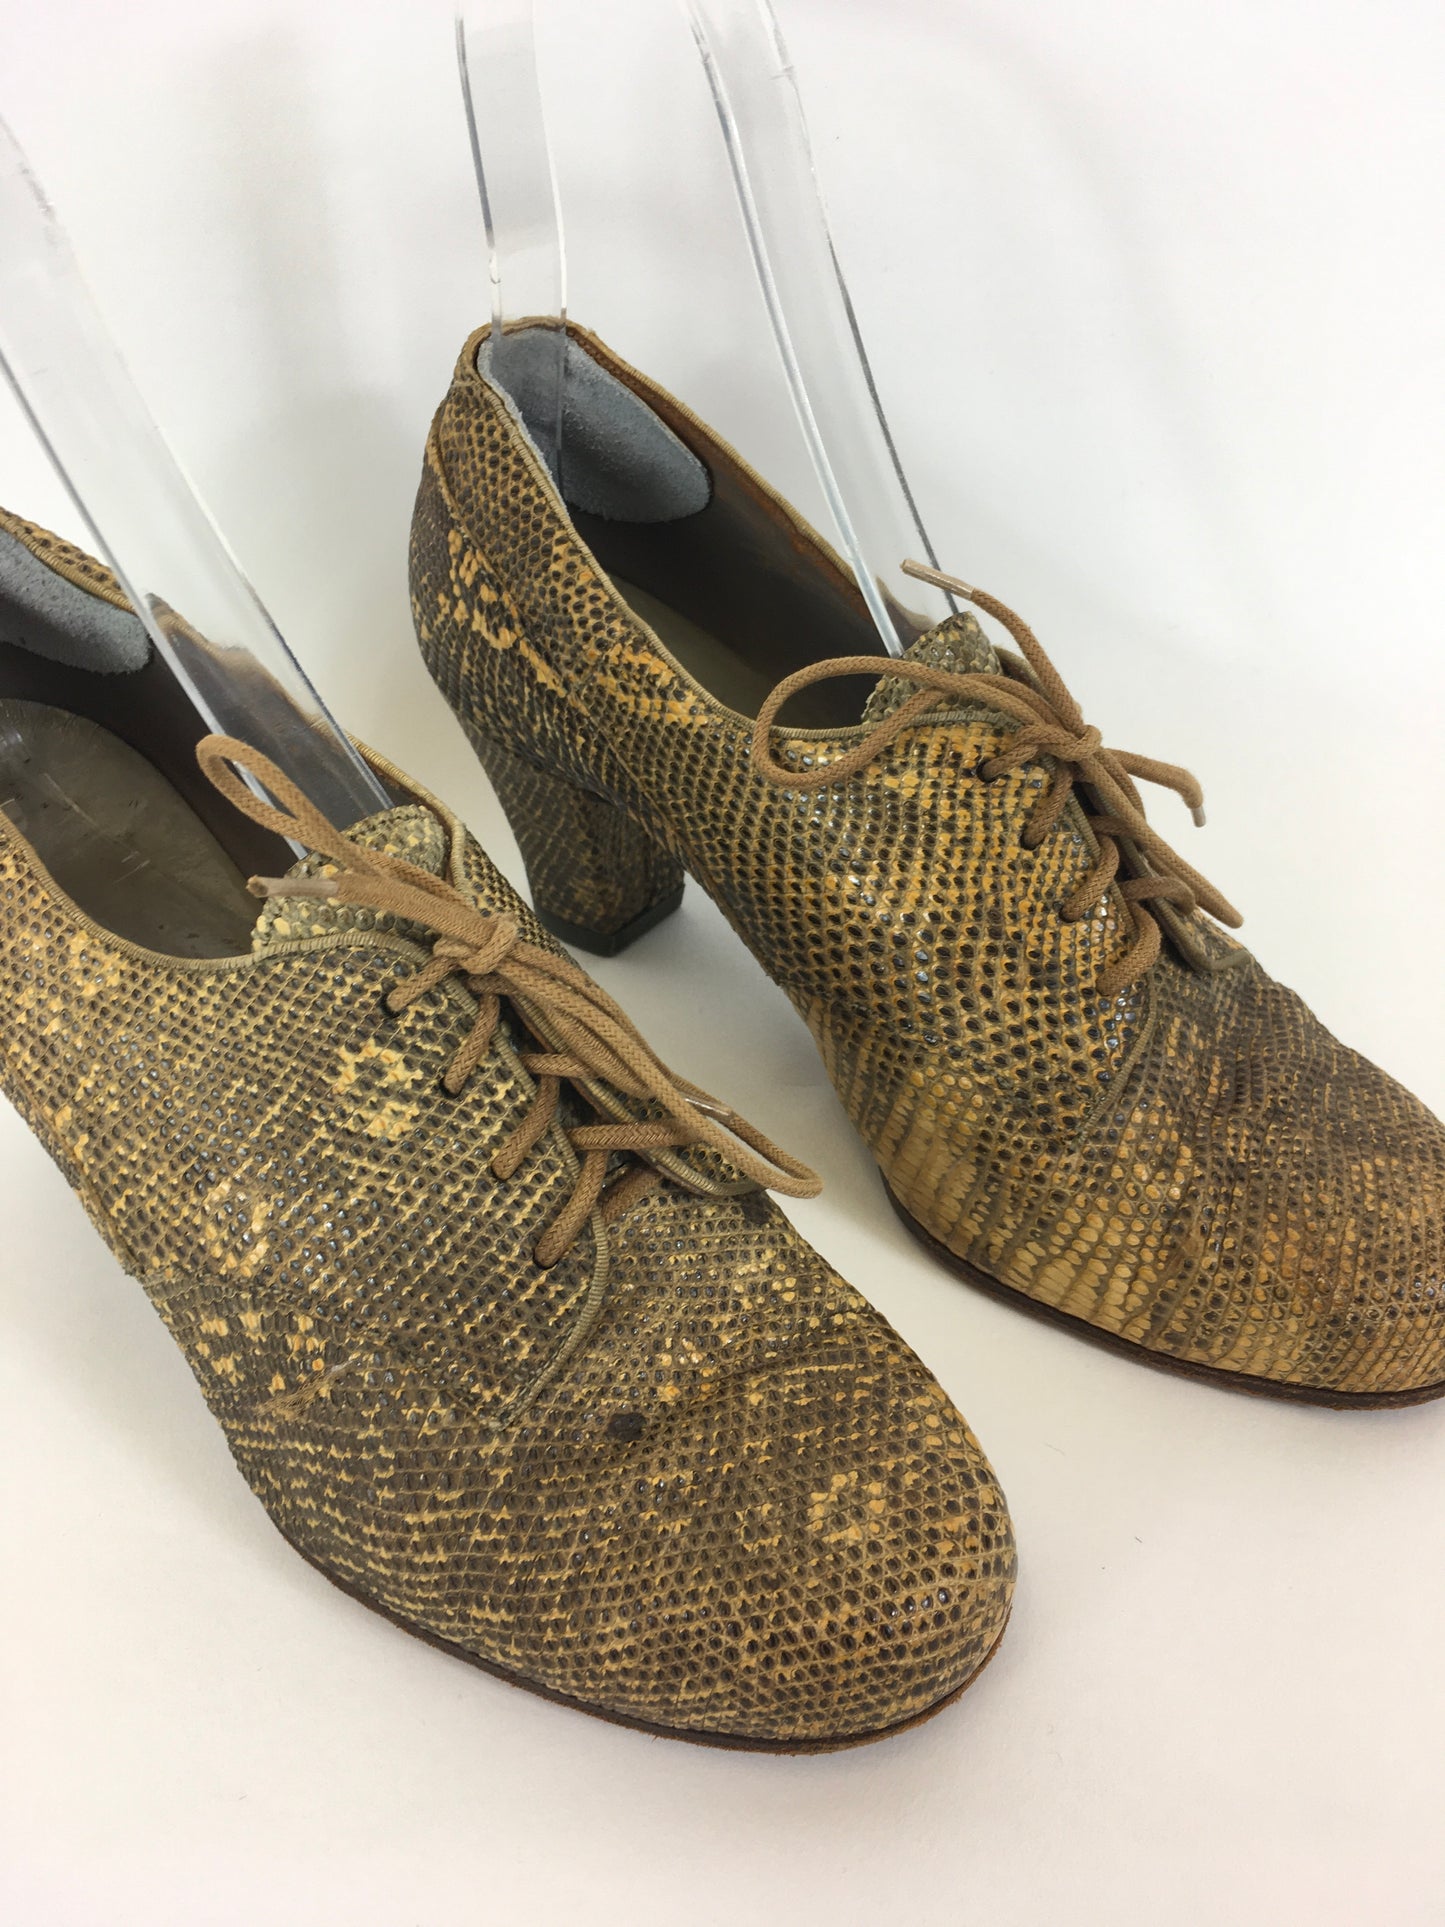 Original 1940’s Fabulous Snakeskin Heeled Lace Up Shoes - In A Lovely Warm Golden Tone